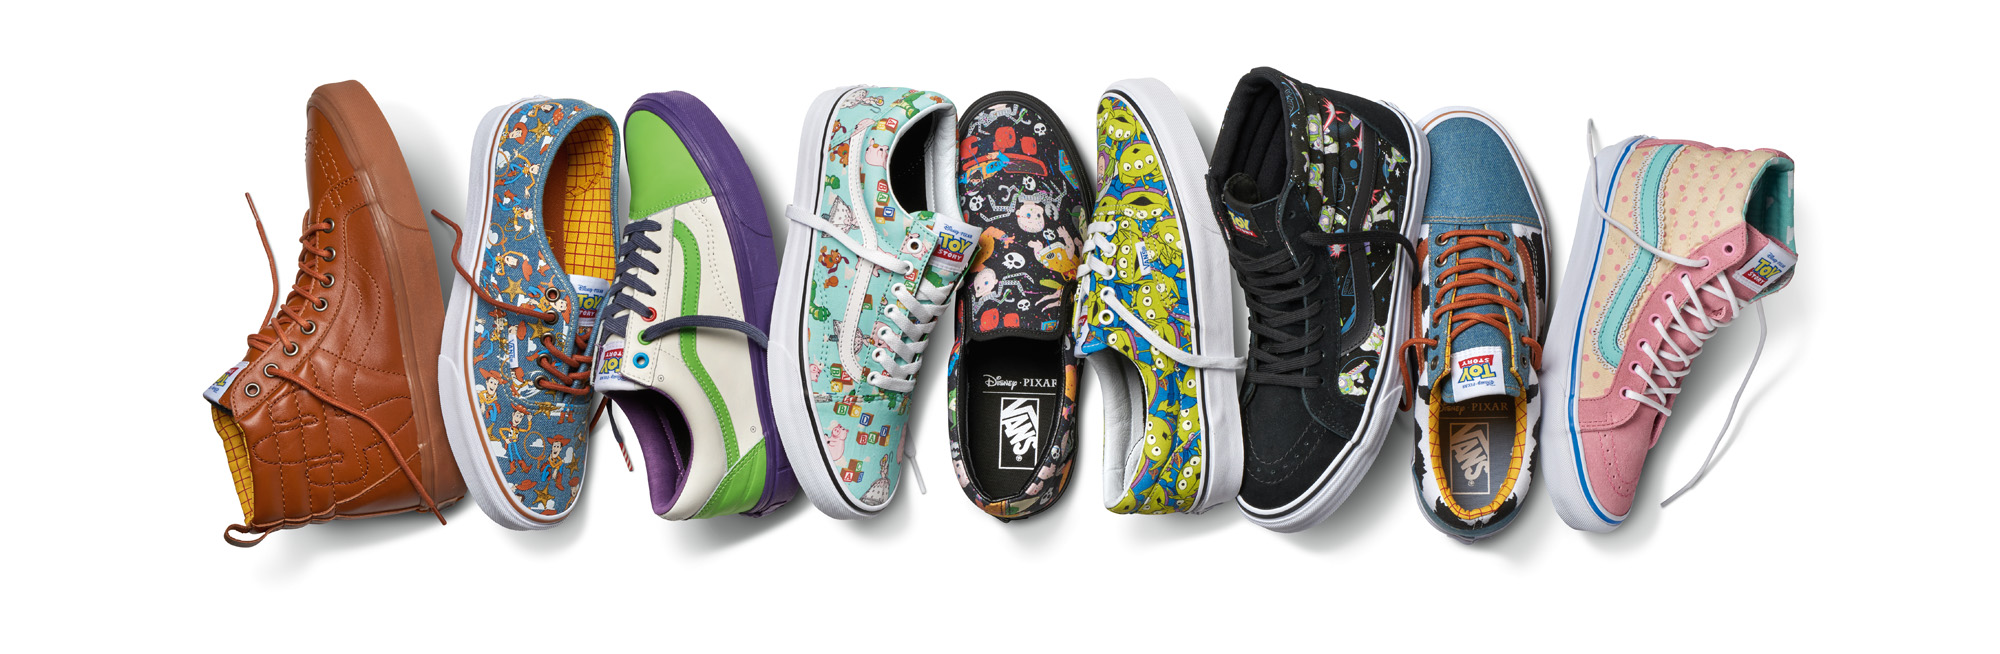 toy story x vans collection